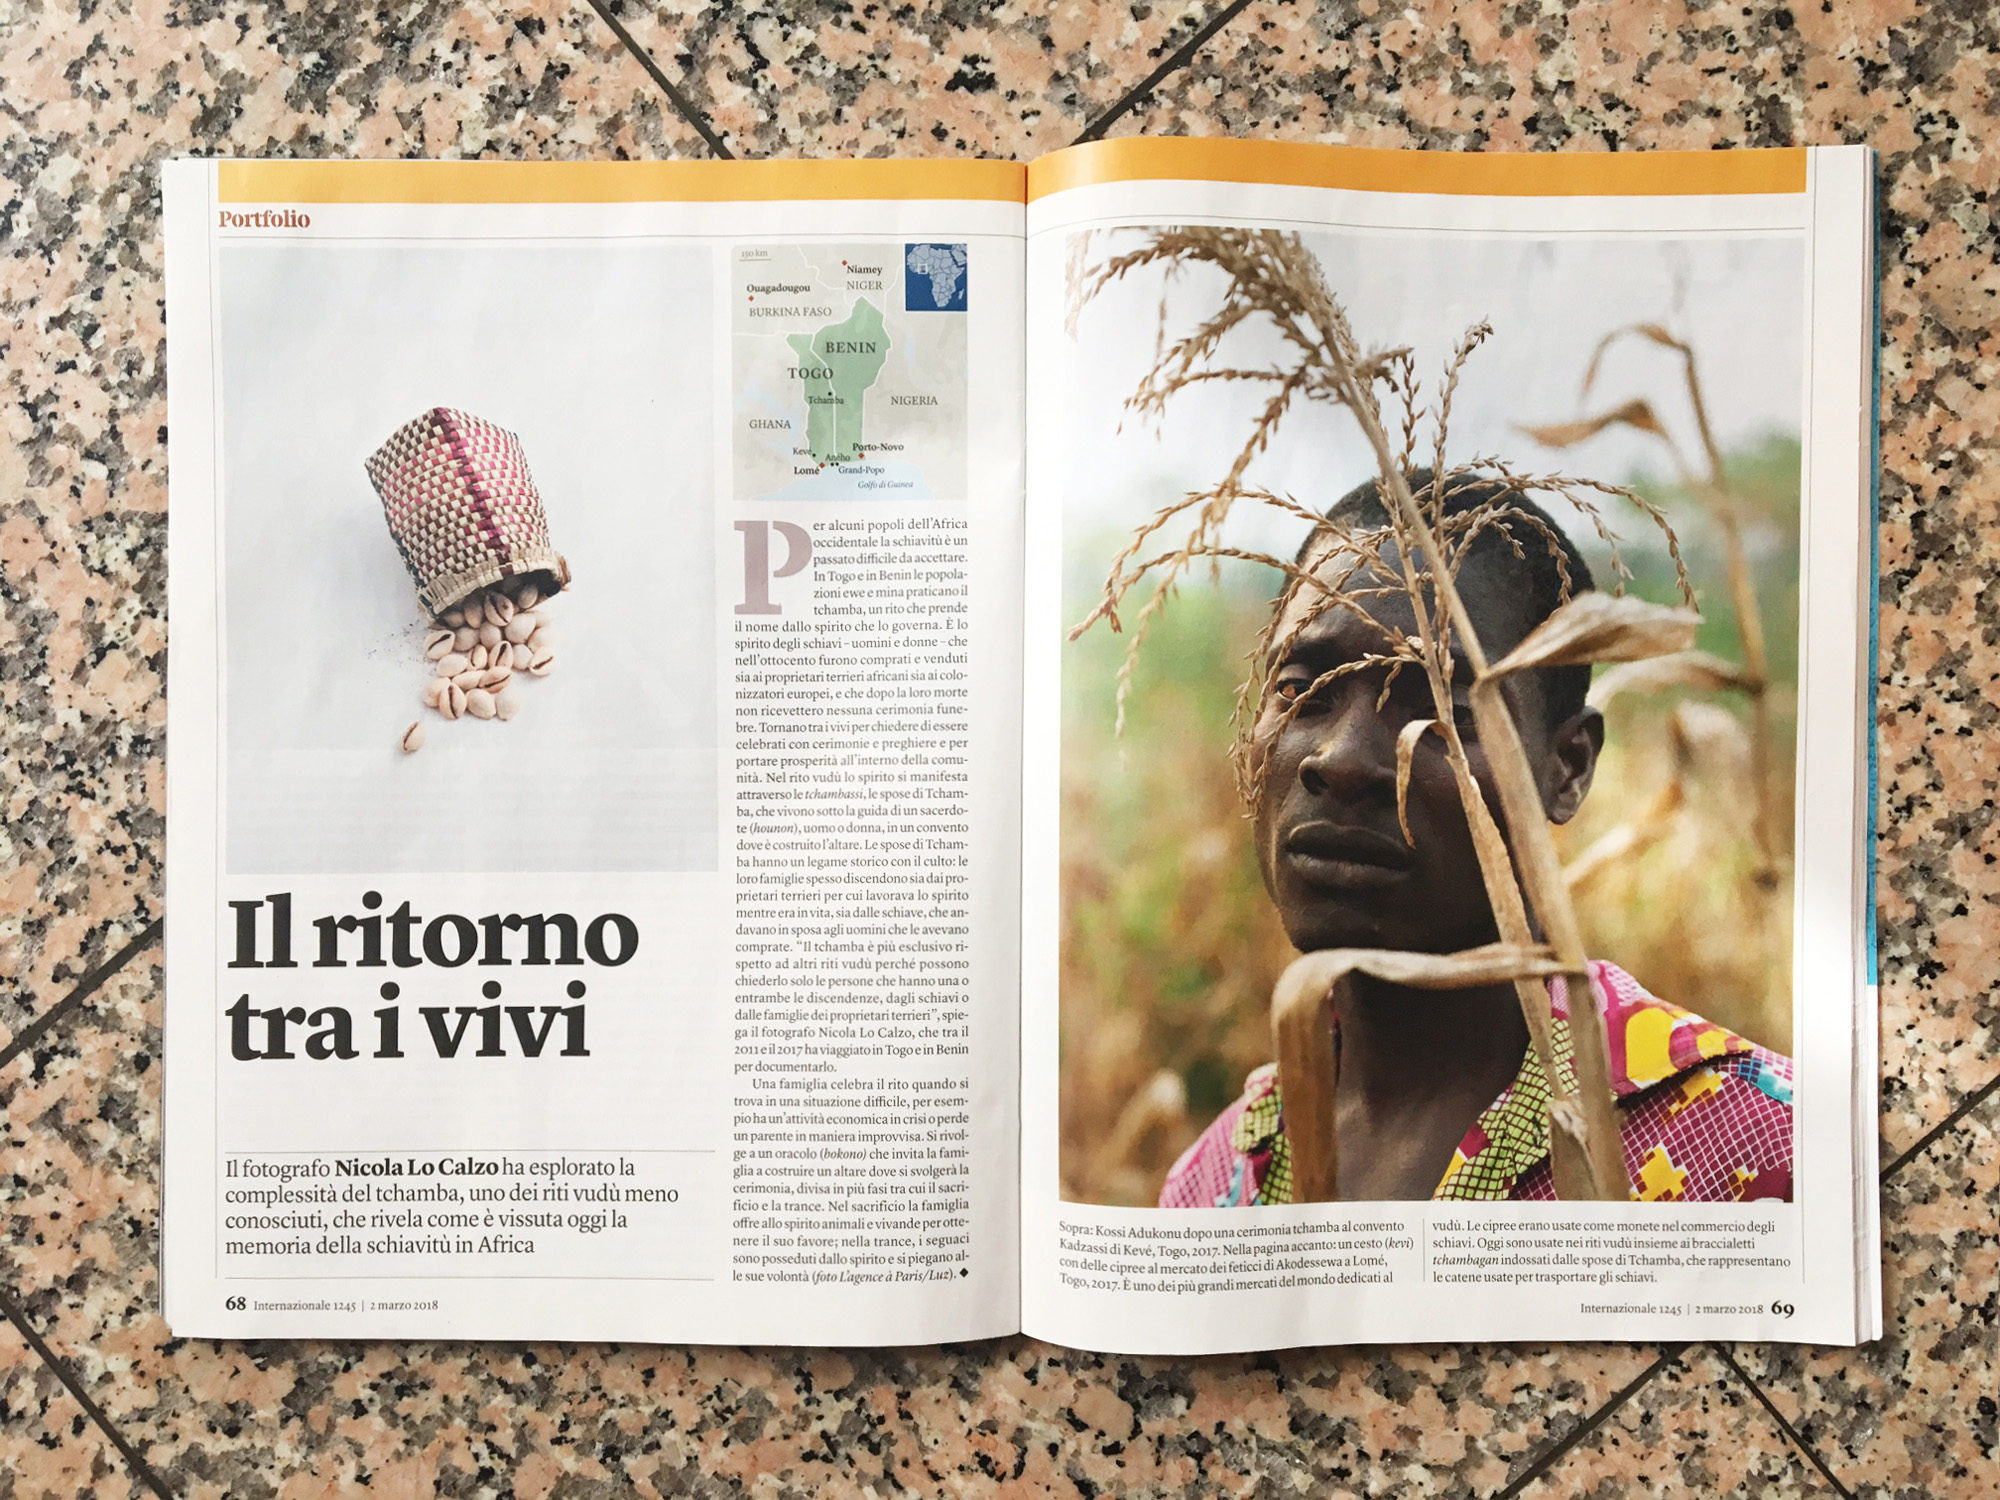 The series Tchamba published in Internazionale